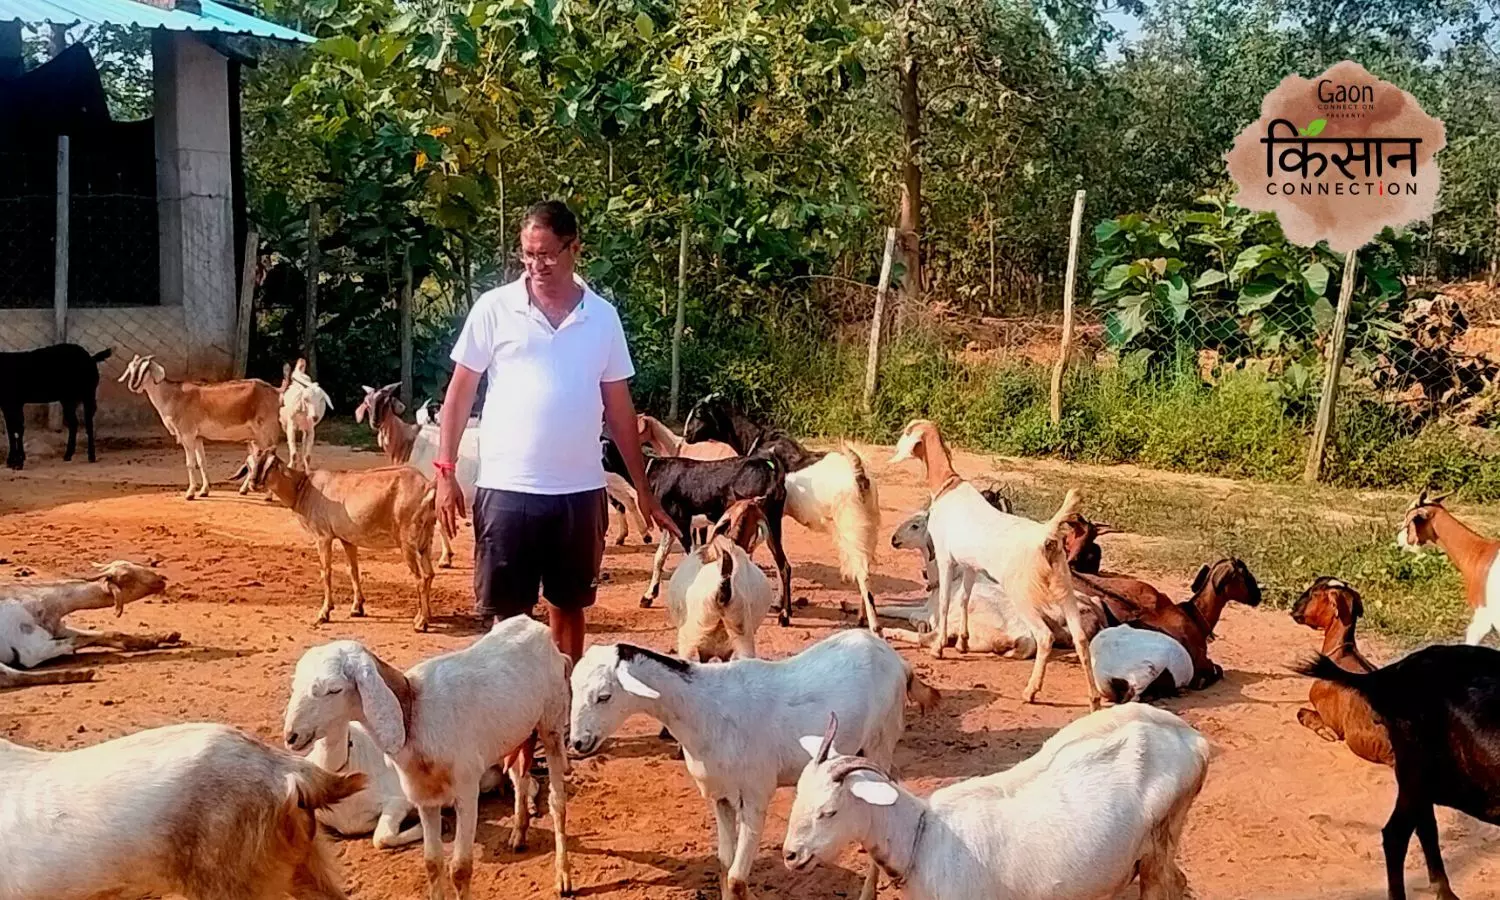 By Breeding Goats And Fish, A Teacher-Turned-Farmer Sarpanch Transforms His Village